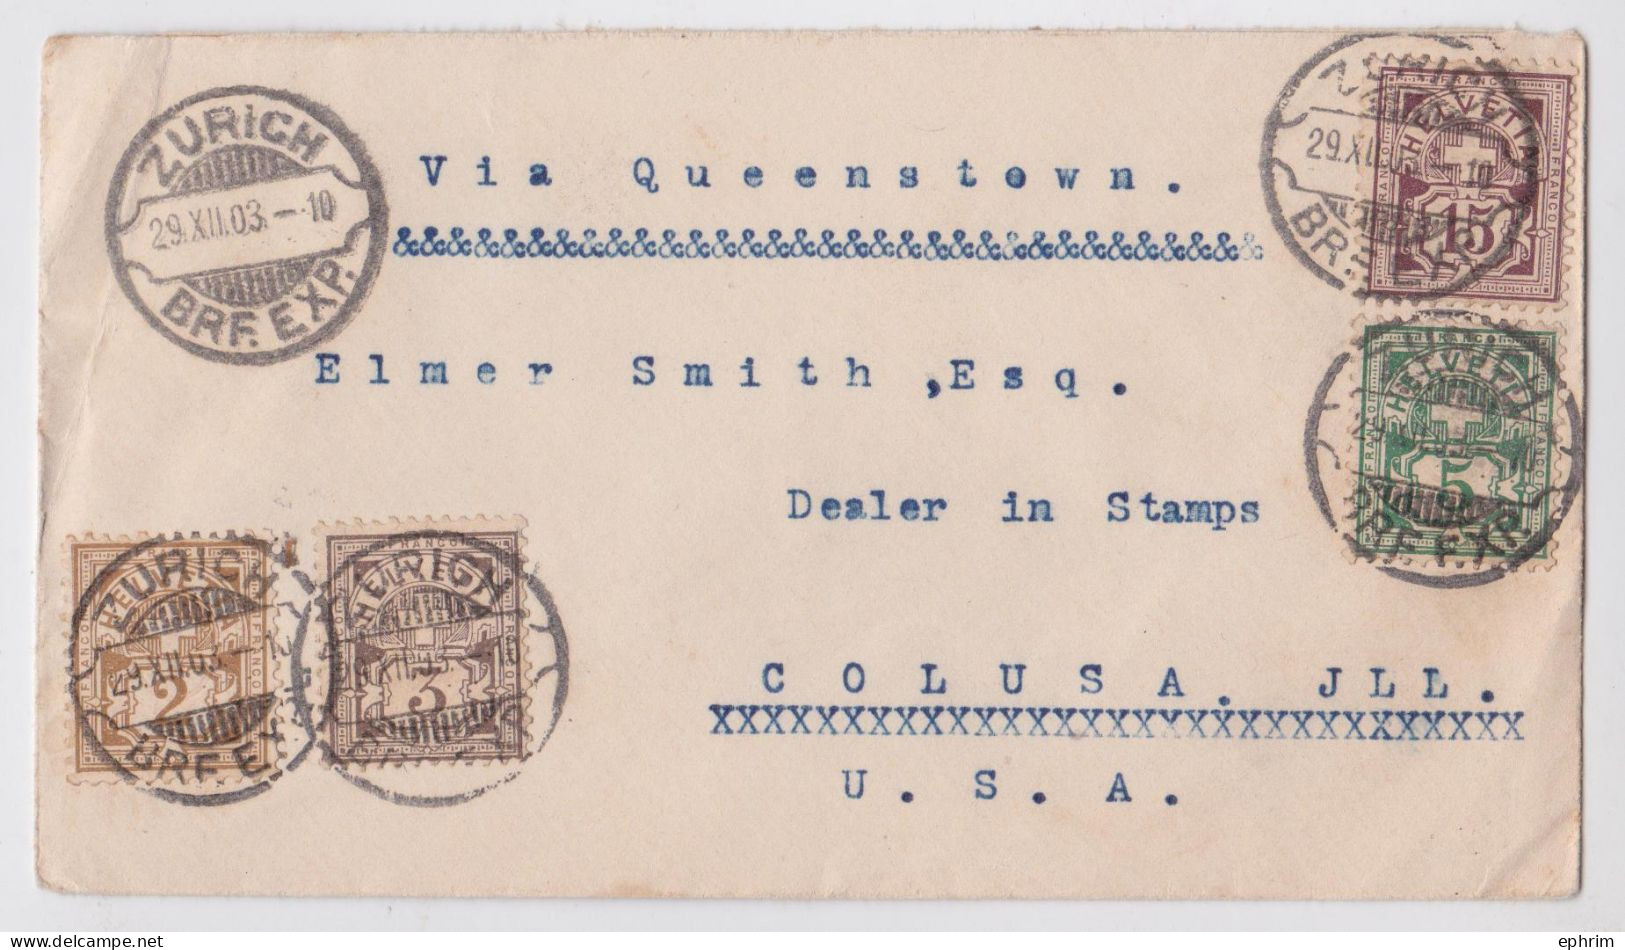 Suisse Zürich Lettre Timbre Pour Colusa Usa Via Queenstown Brief Briefmarke Stamp Mail Cover 1903 - Covers & Documents